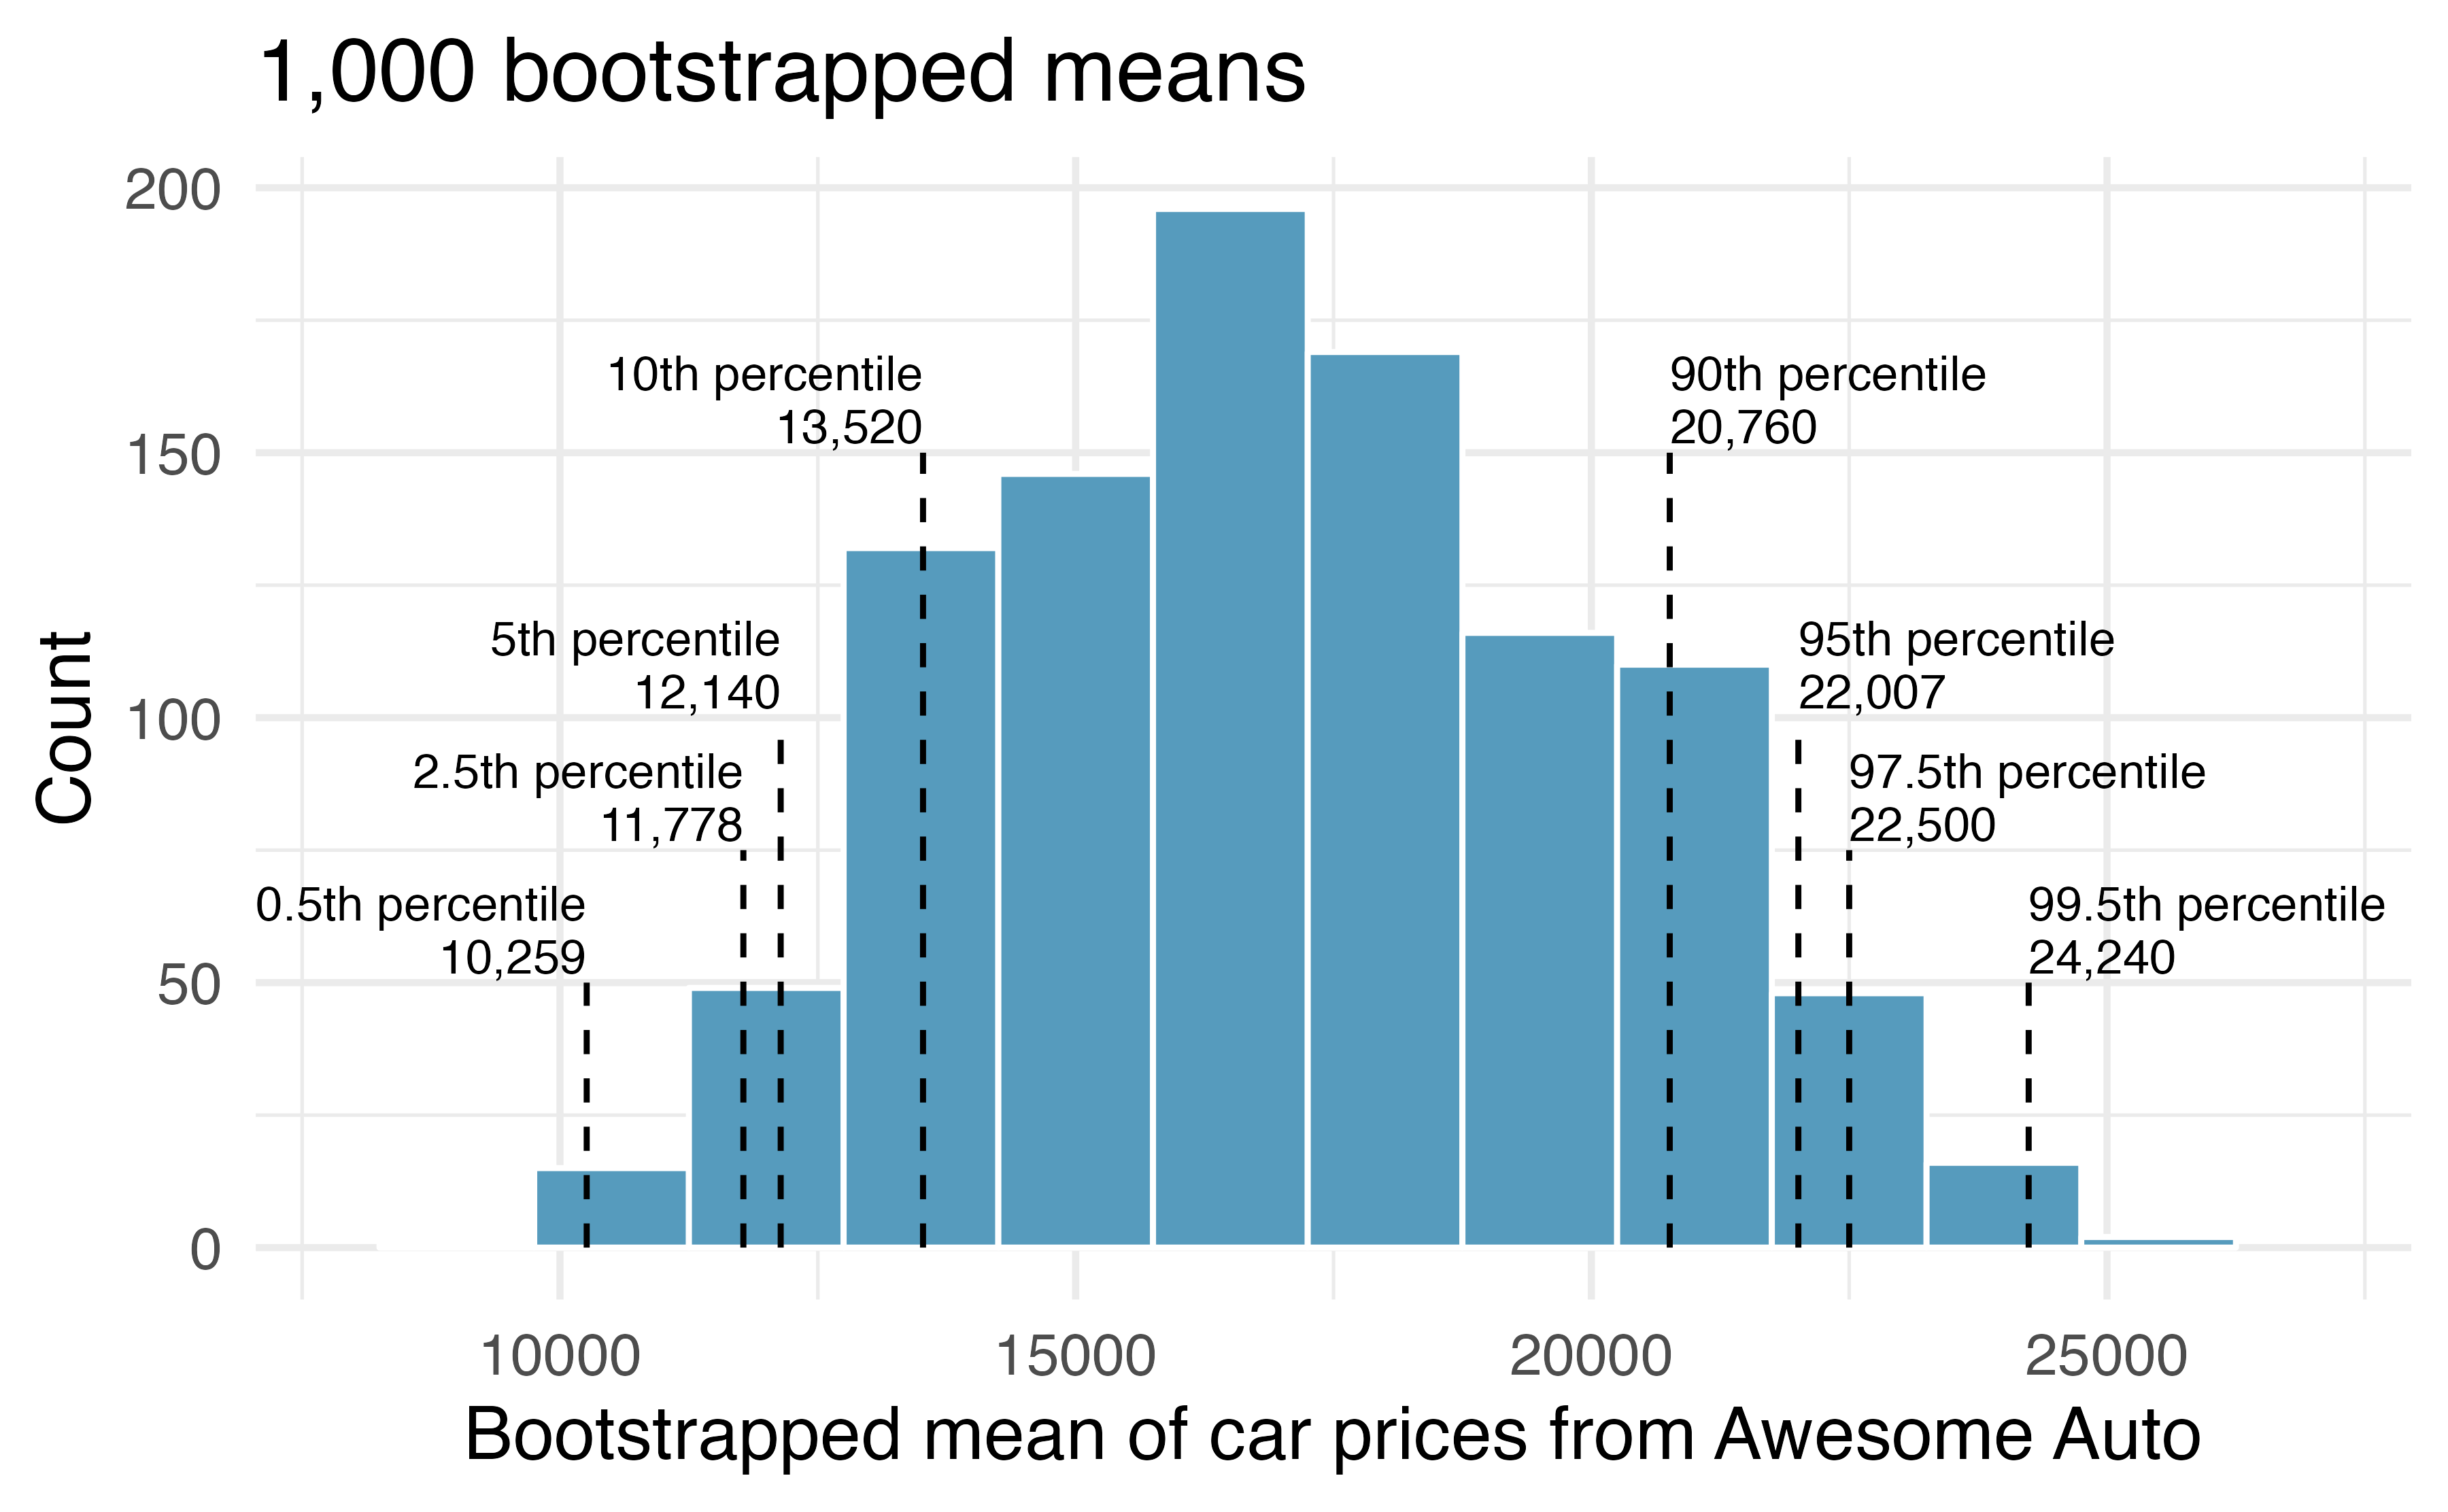 The original Awesome Auto data is bootstrapped 1,000 times. The histogram provides a sense for the variability of the average car price from sample to sample.